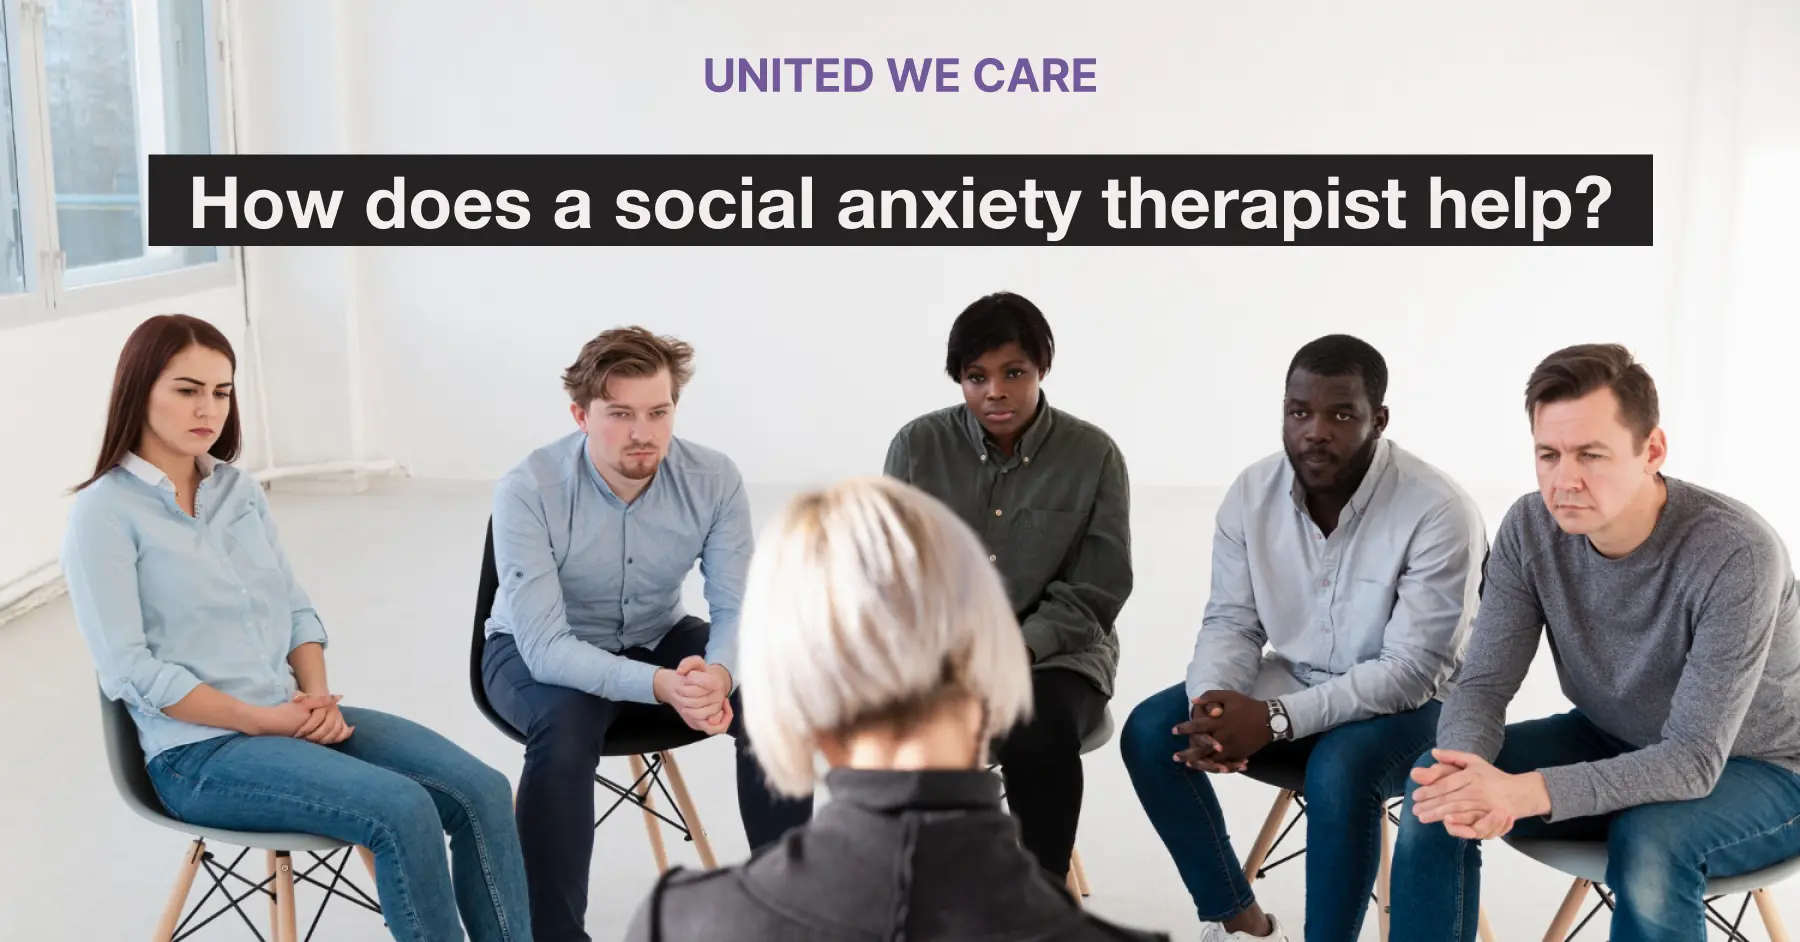 How Does a Social Anxiety Therapist Help?